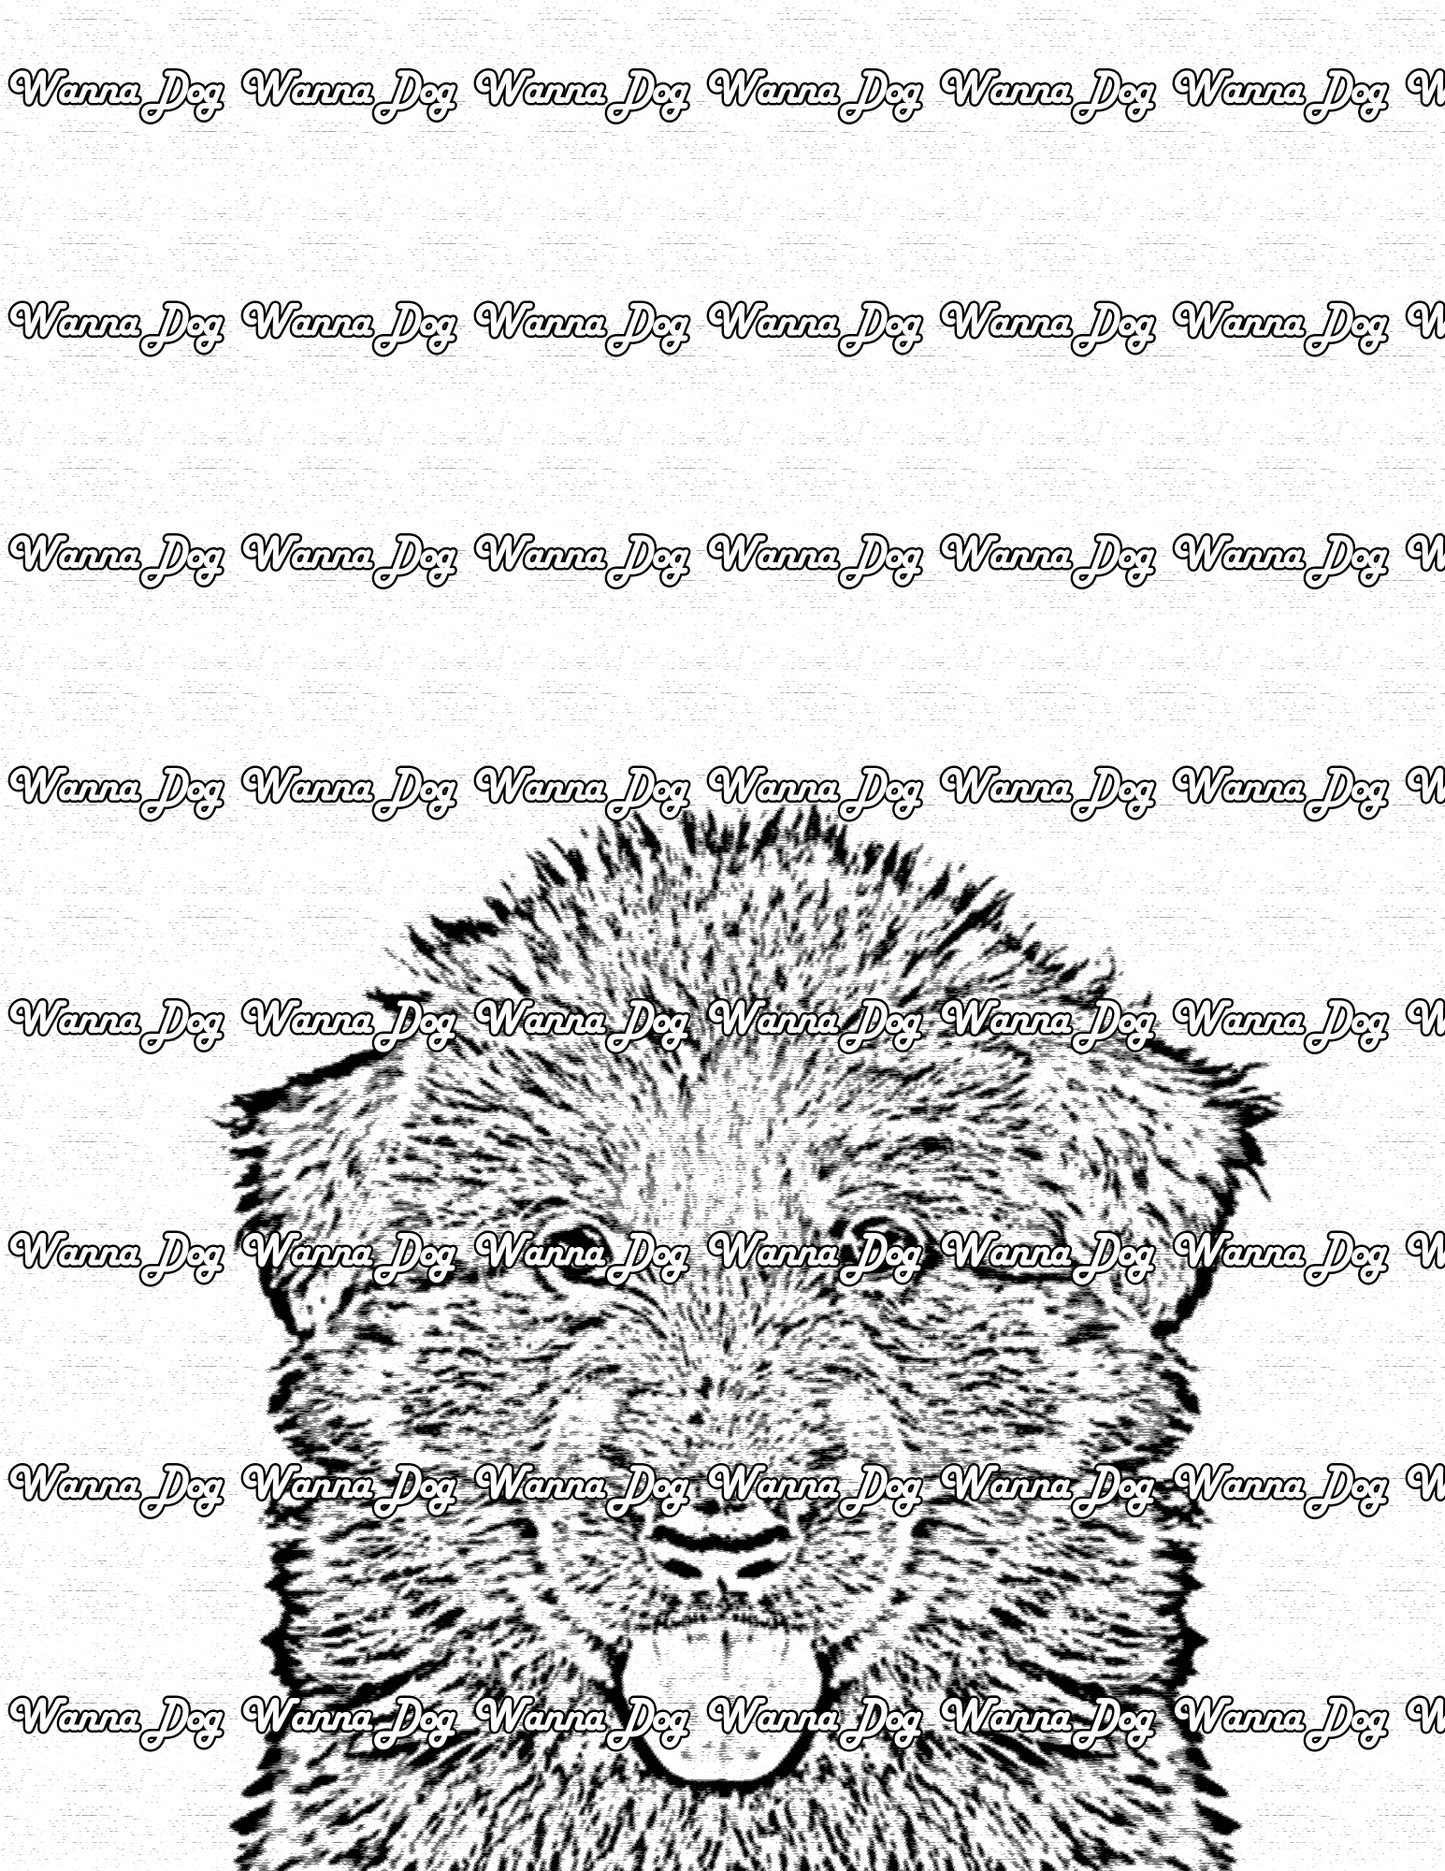 German Shepherd Puppy Coloring Pages of a German Shepherd Puppy with their tongue out